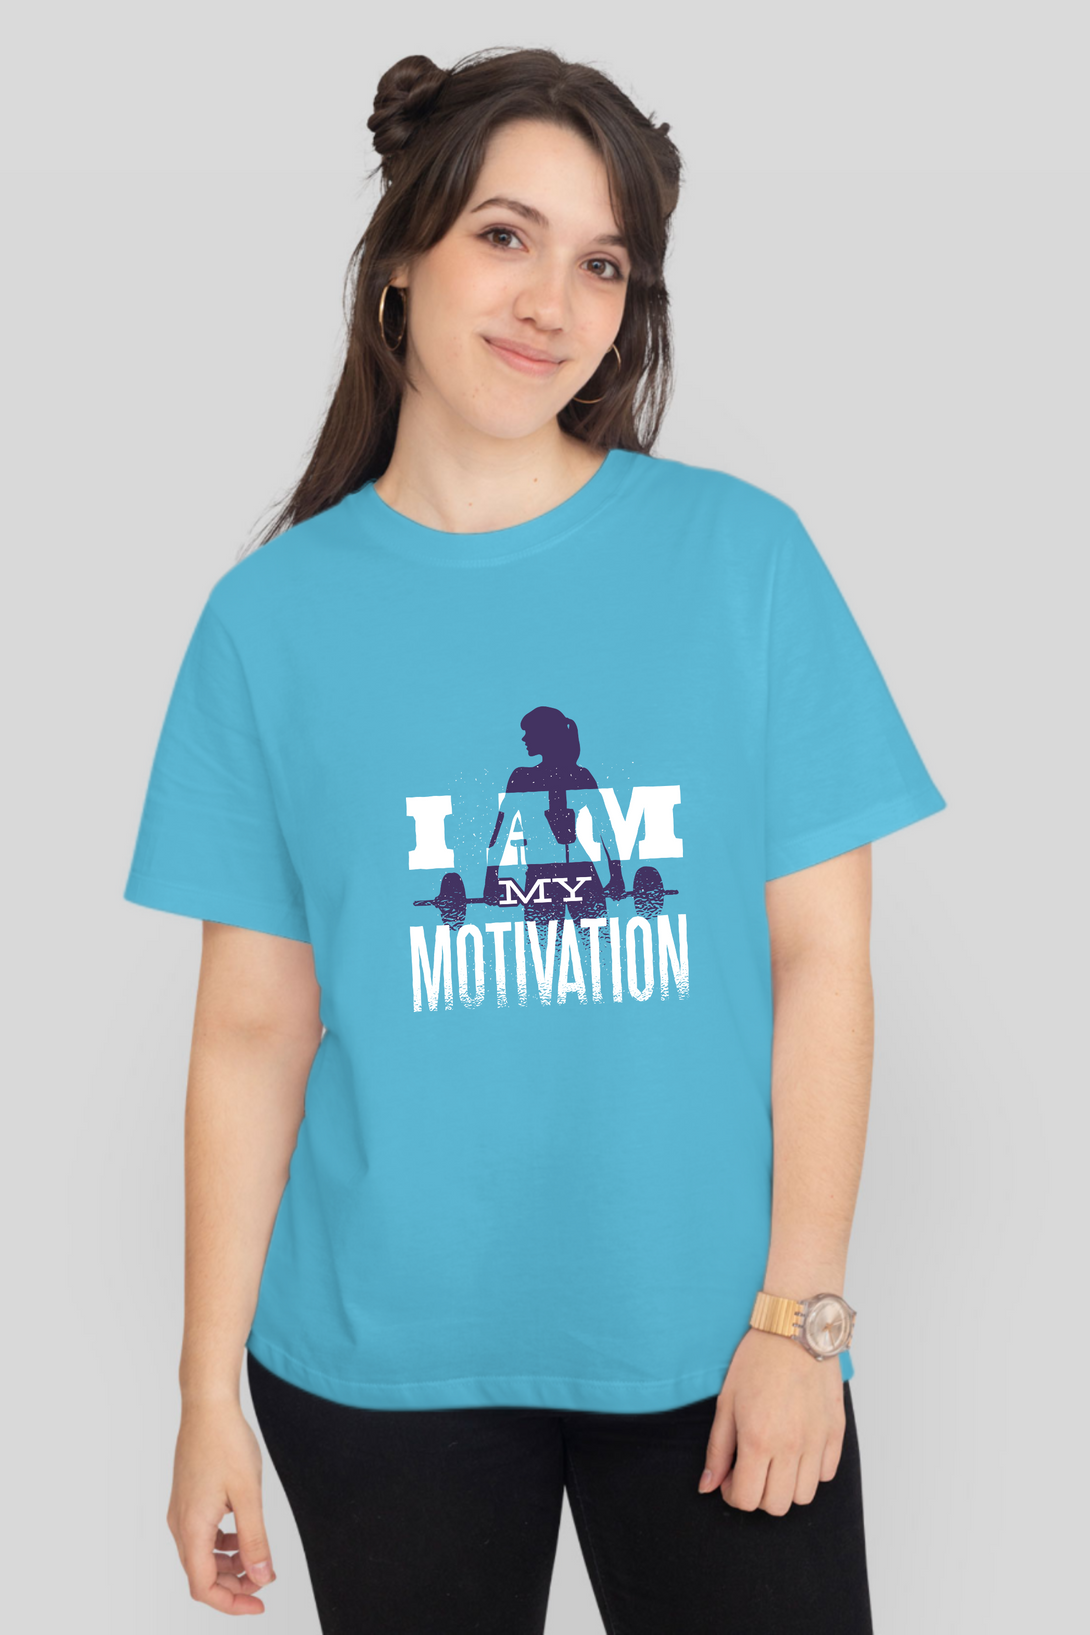 I Am My Motivation Printed T-Shirt For Women - WowWaves - 8